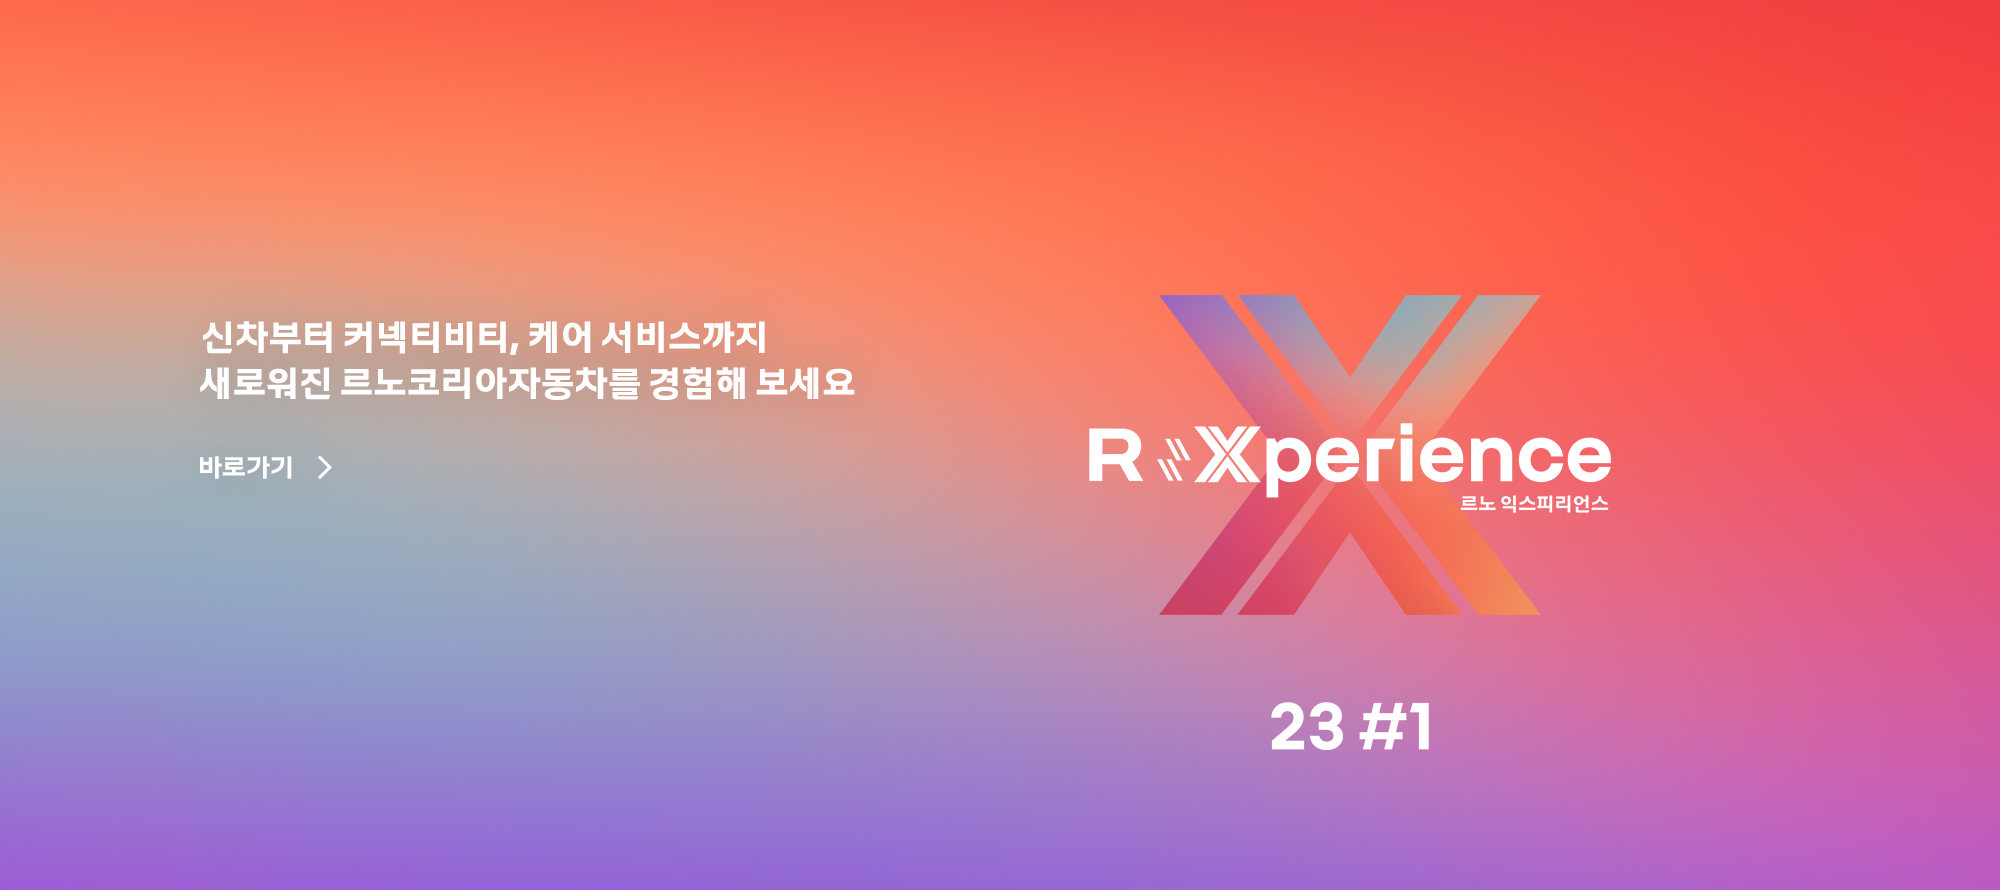 R:Xperience